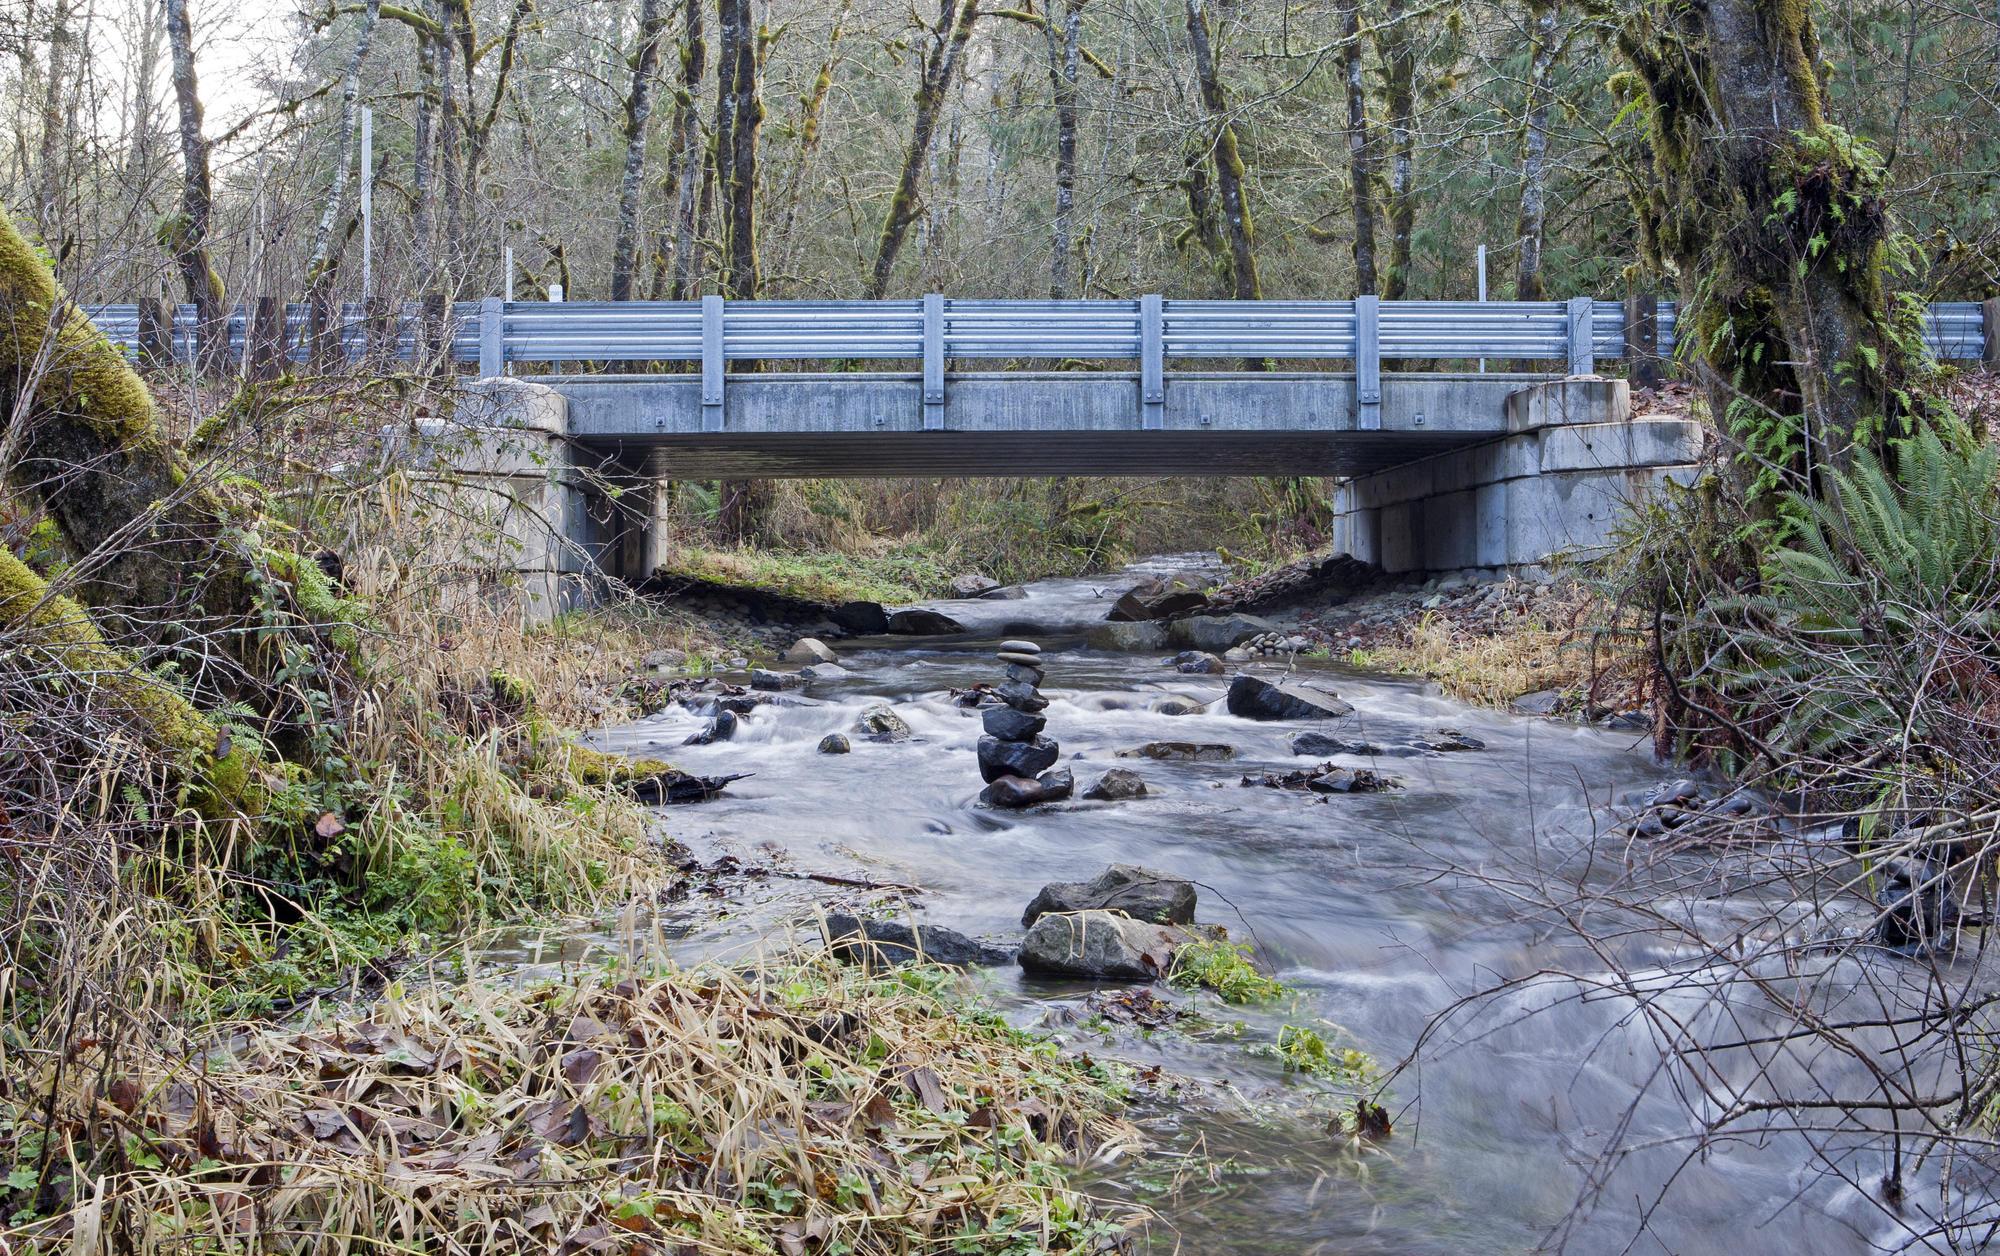 Creek with bridge in place, replacing previous culverts.